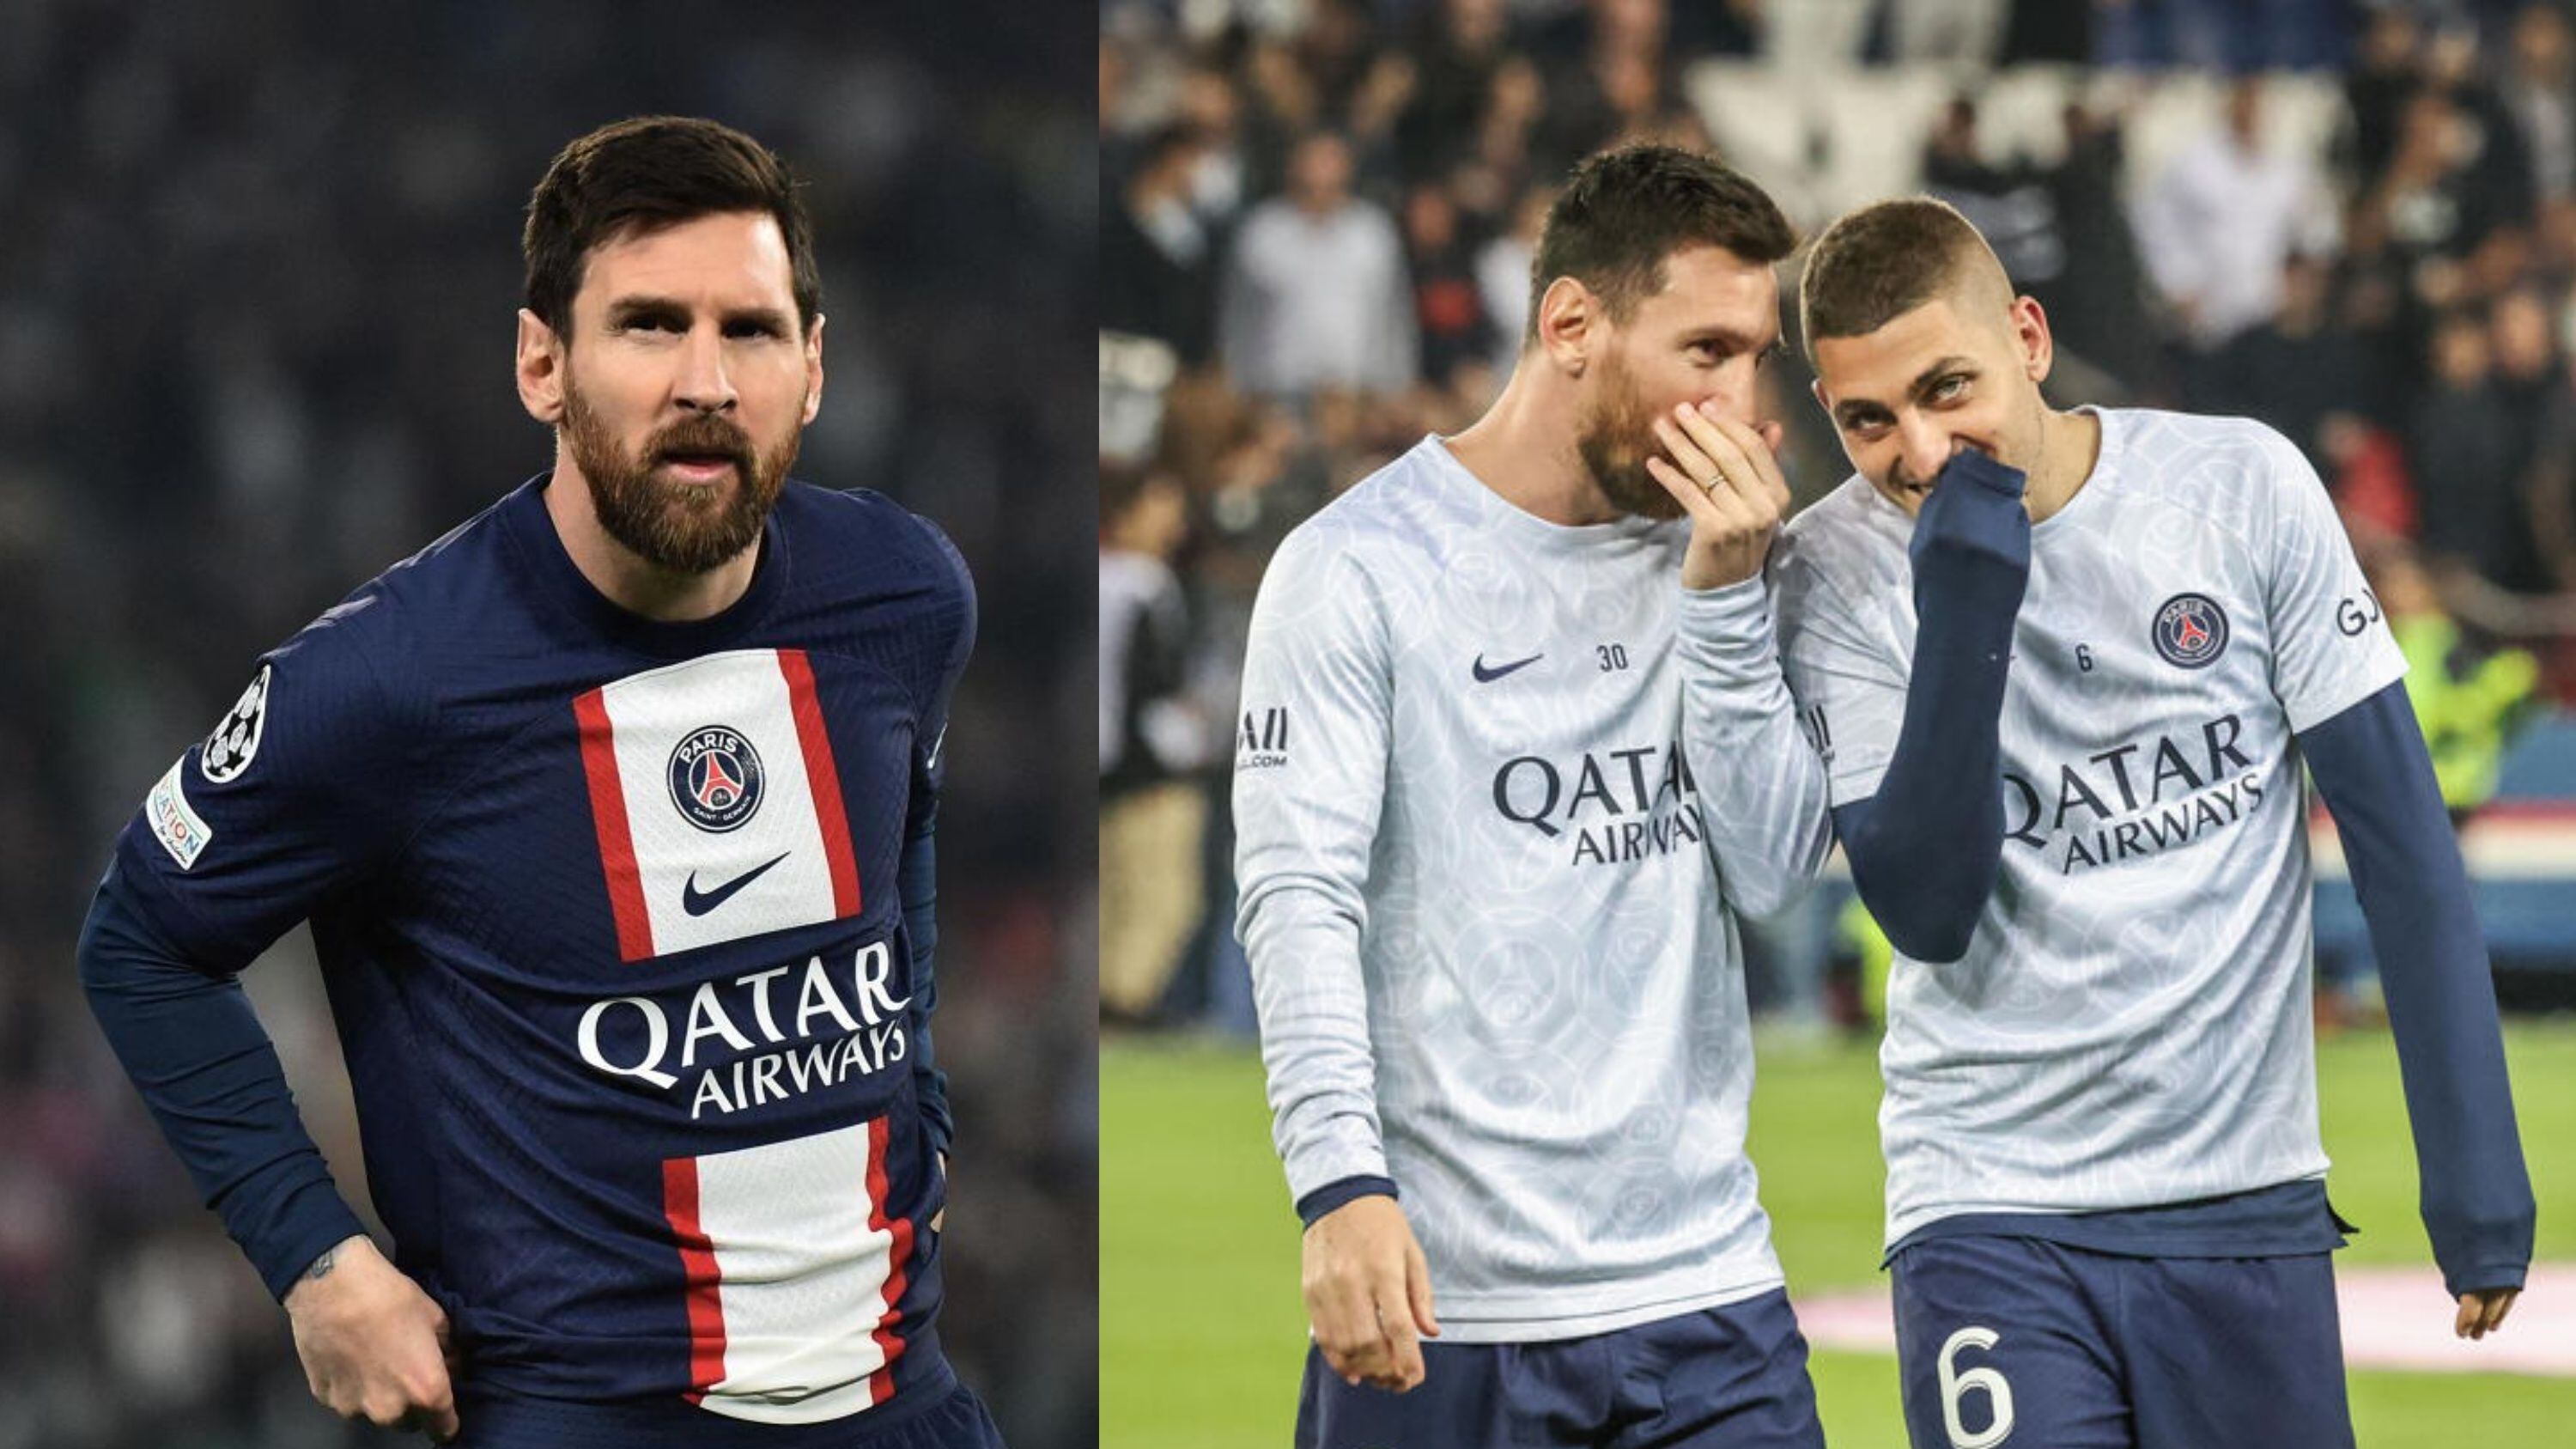 Lionel Messi's emotional farewell message to Marco Verratti, who will play in Qatar